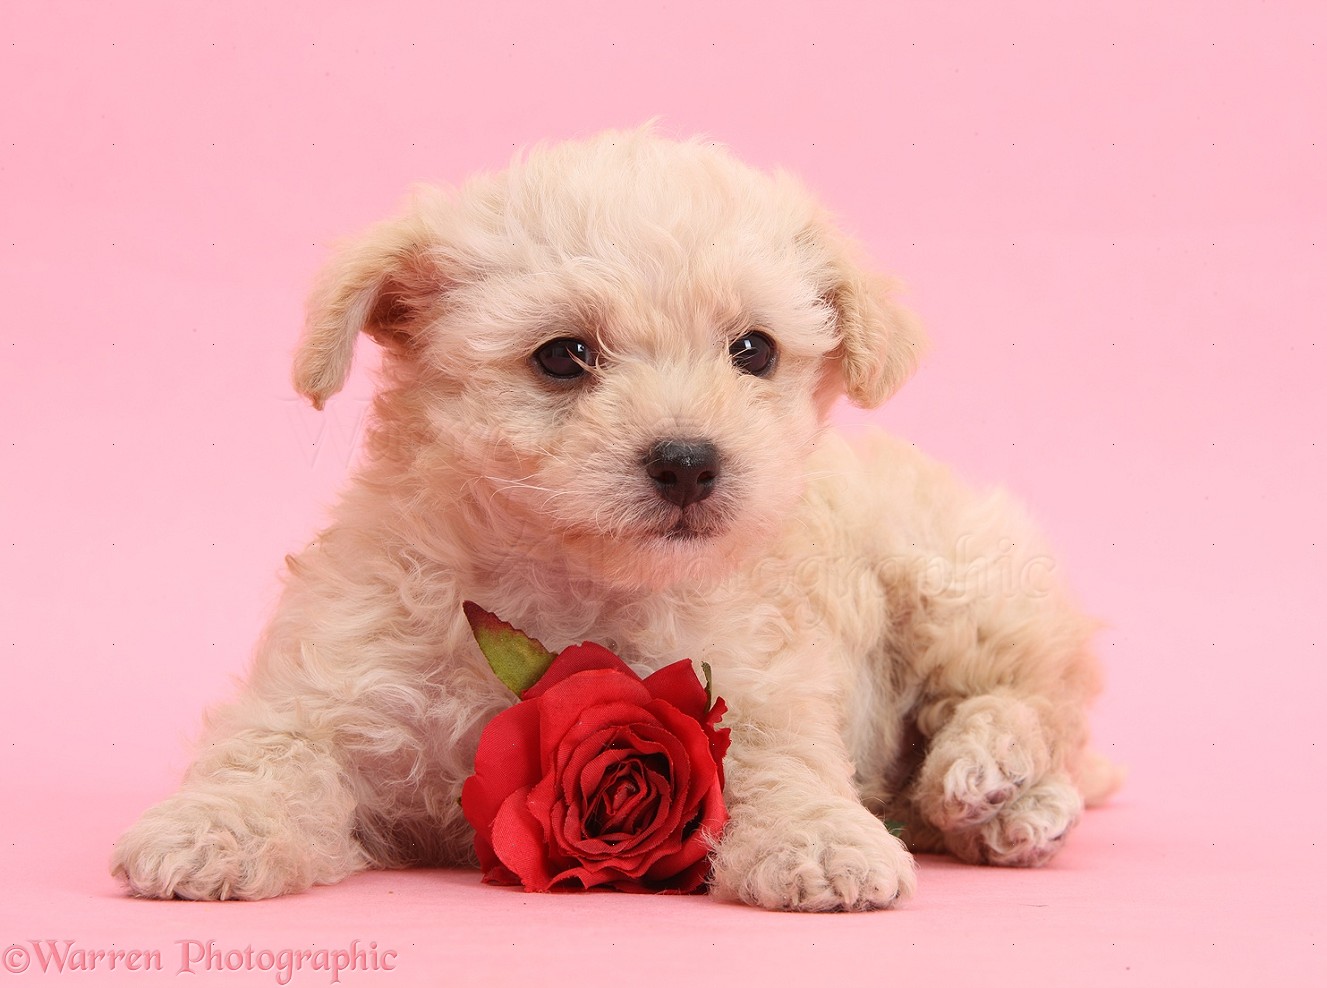 Dog Cute Valentine Puppy With Rose On Pink